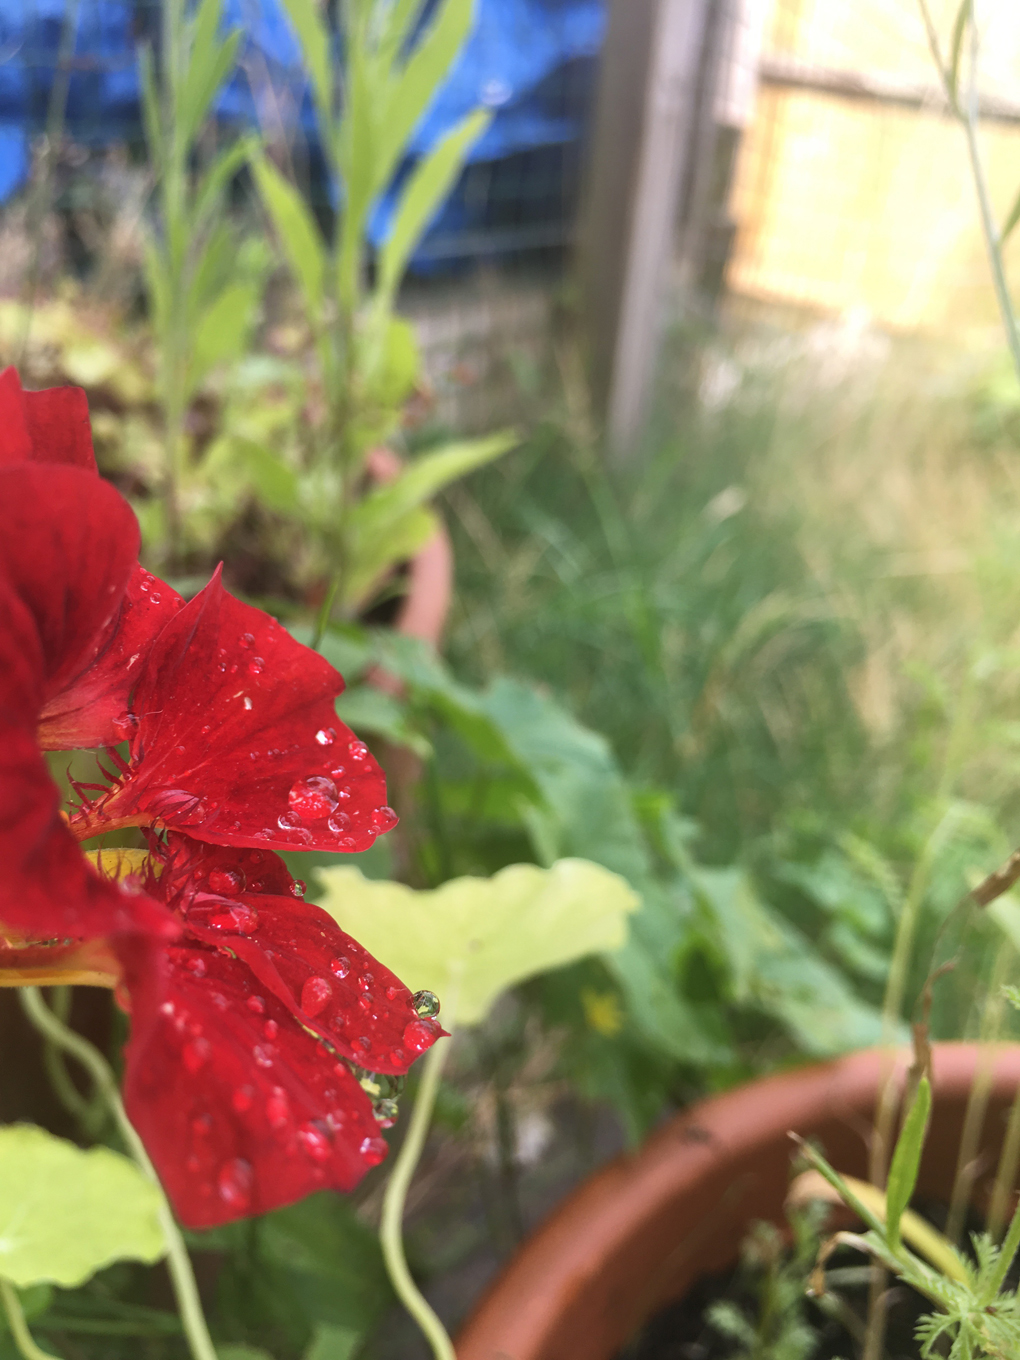 Droplets of water on bright red flower petals sparkling in the sun